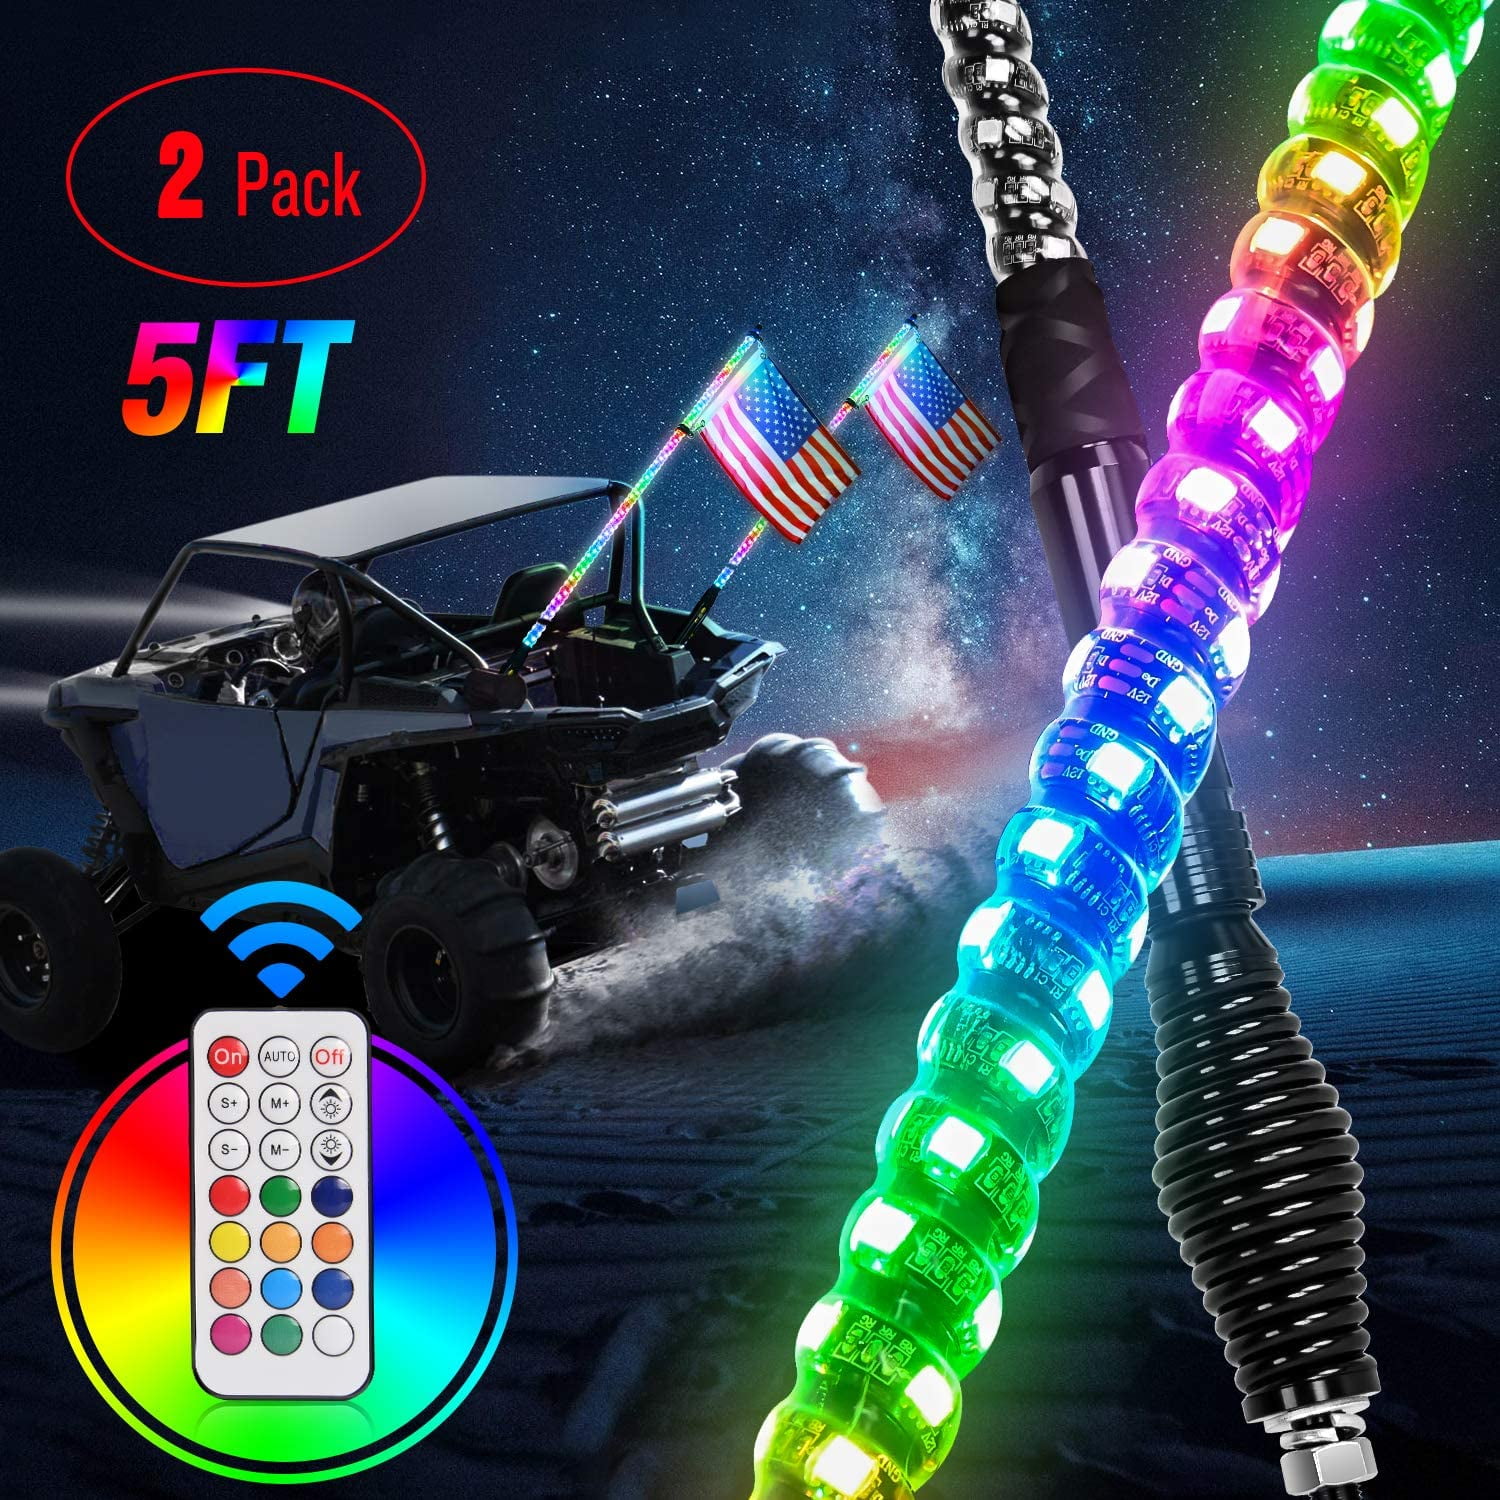 Teochew-LED 5FT LED Whip Lights with RF Remote Control Smoked Black Spiral RGB Dancing/Chasing Light Antenna LED Whips for UTV ATV Off Road Polaris RZR Truck 4X4 SXS Can-am Dune Vehicle 